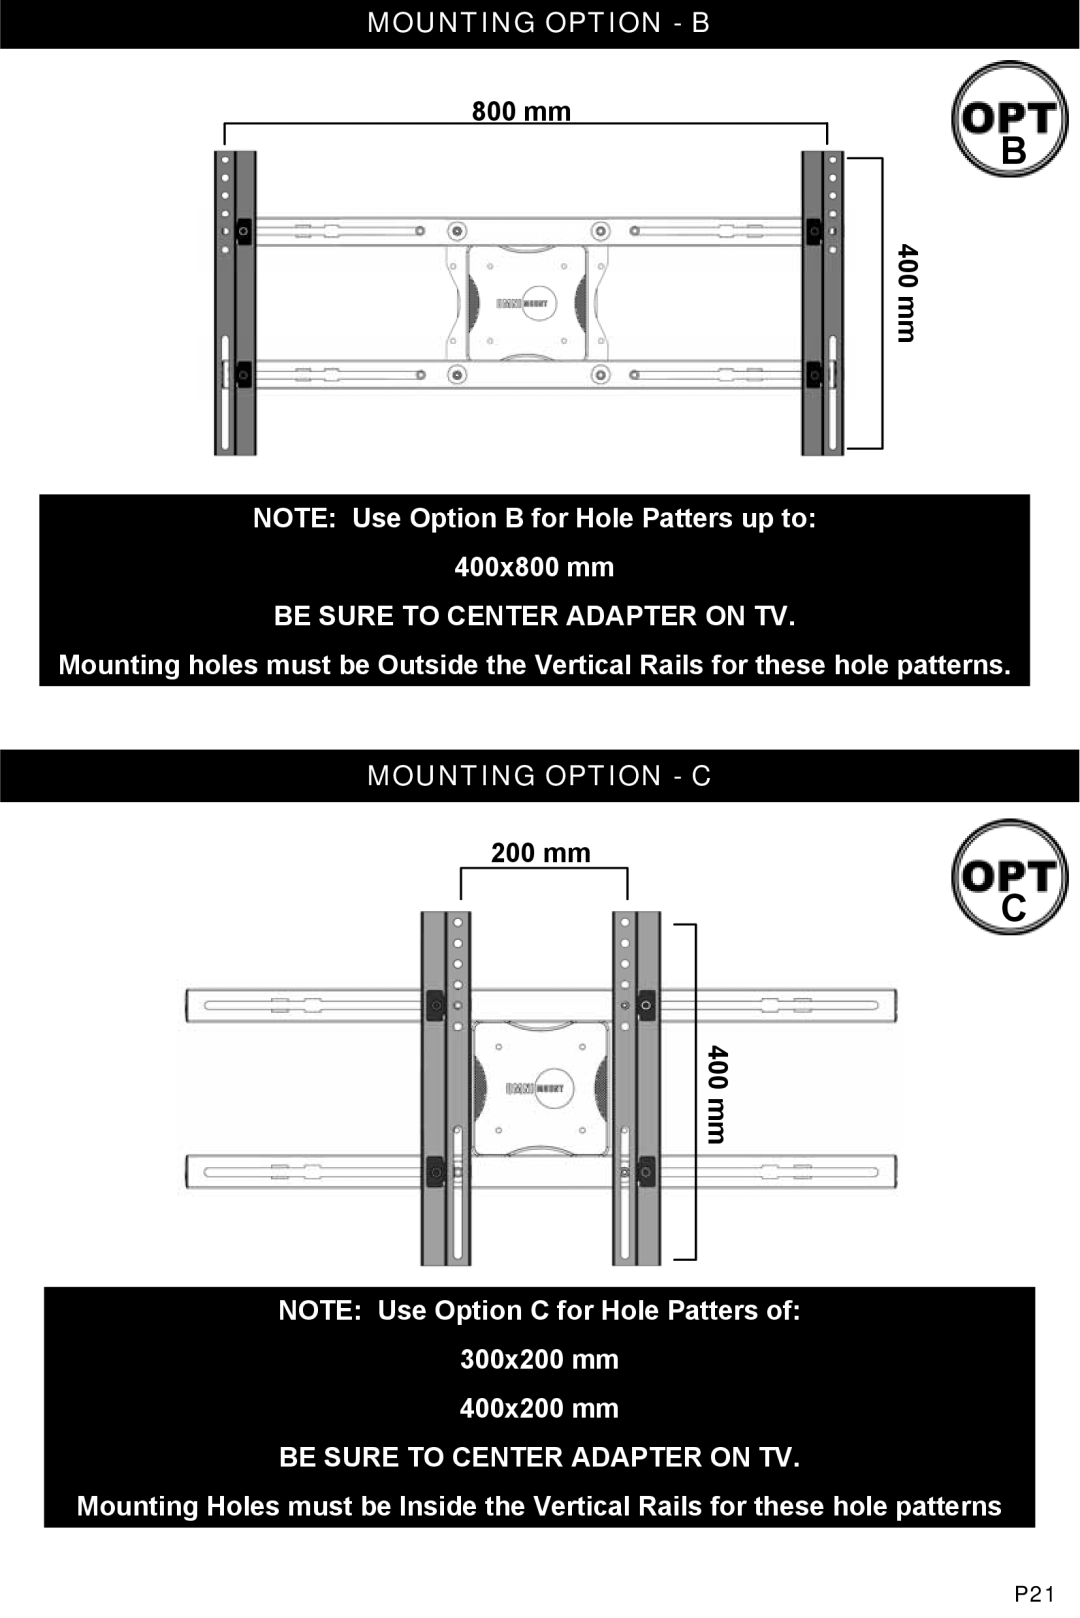 Omnimount 1004164, NC125CI Mounting Option - B, 400 mm, NOTE Use Option B for Hole Patters up to 400x800 mm, 200 mm 